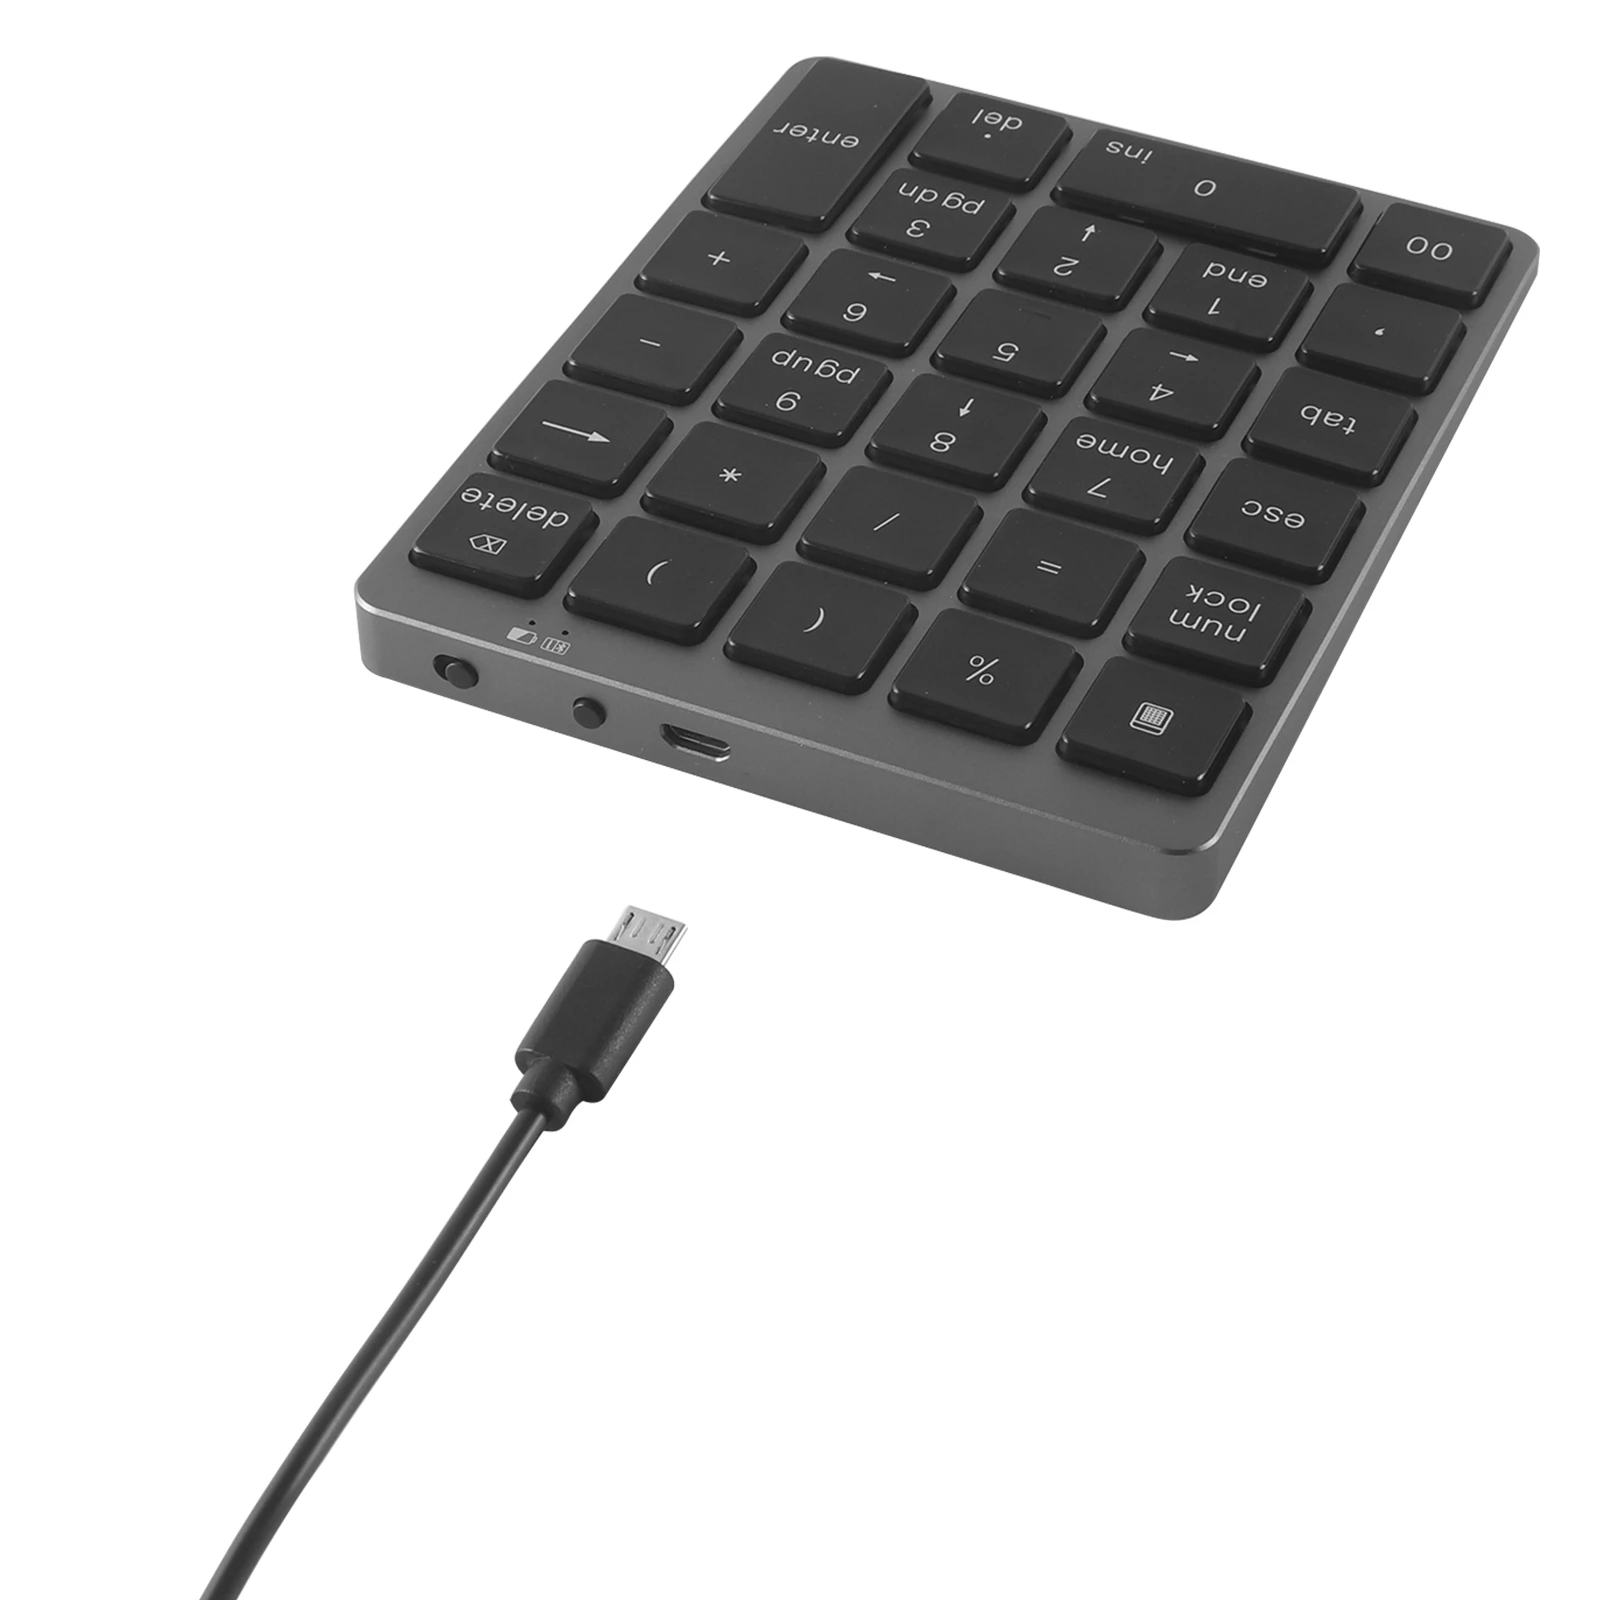 Zeshlla Bluetooth 3.0 Wireless Keyboard with Alloy Back Cover For iOS/Android and Windows PC/Laptop/iPad/MacBook and More 